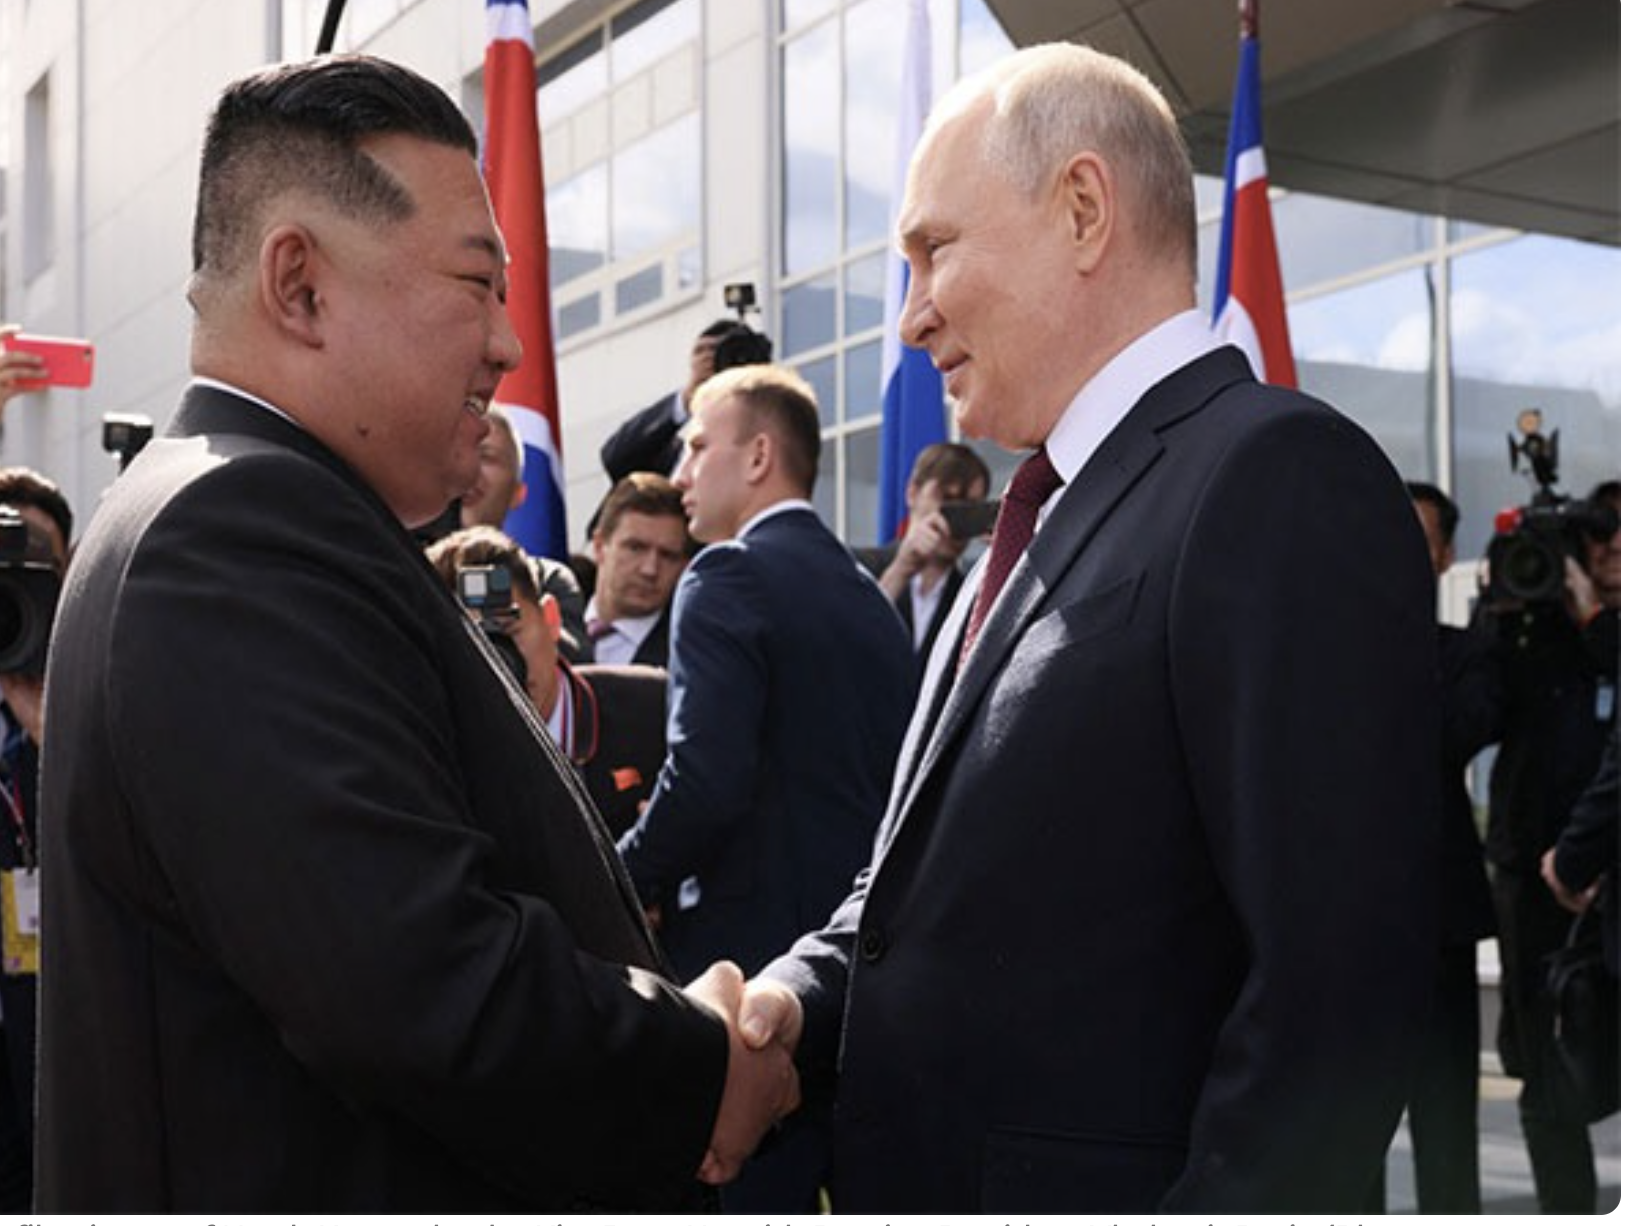 russia-north-korea-to-work-together-to-counter-western-sanctions-putin-says-ahead-of-pyongyang-visit